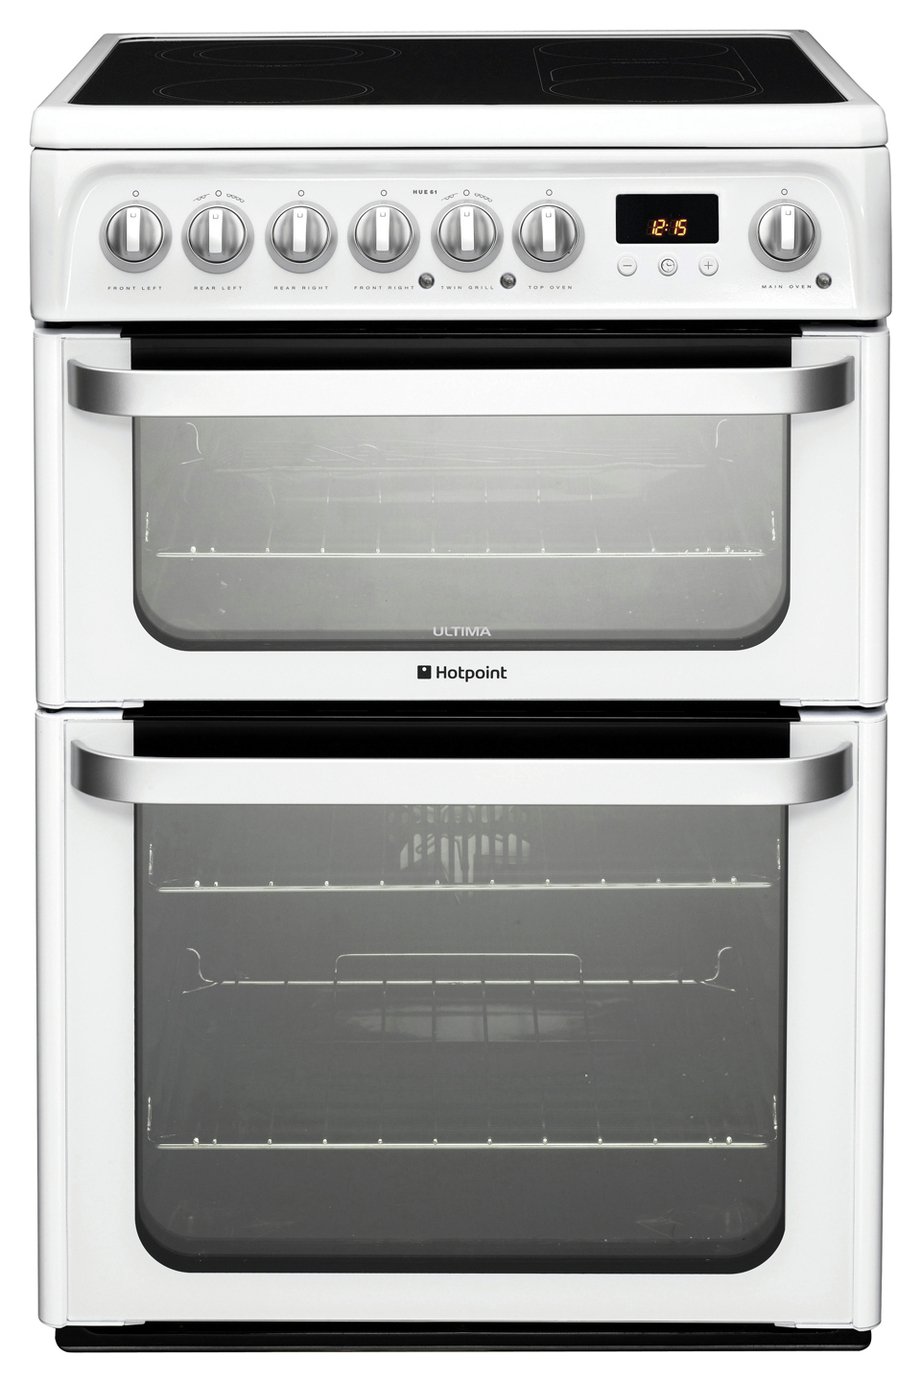 freestanding double oven electric cookers